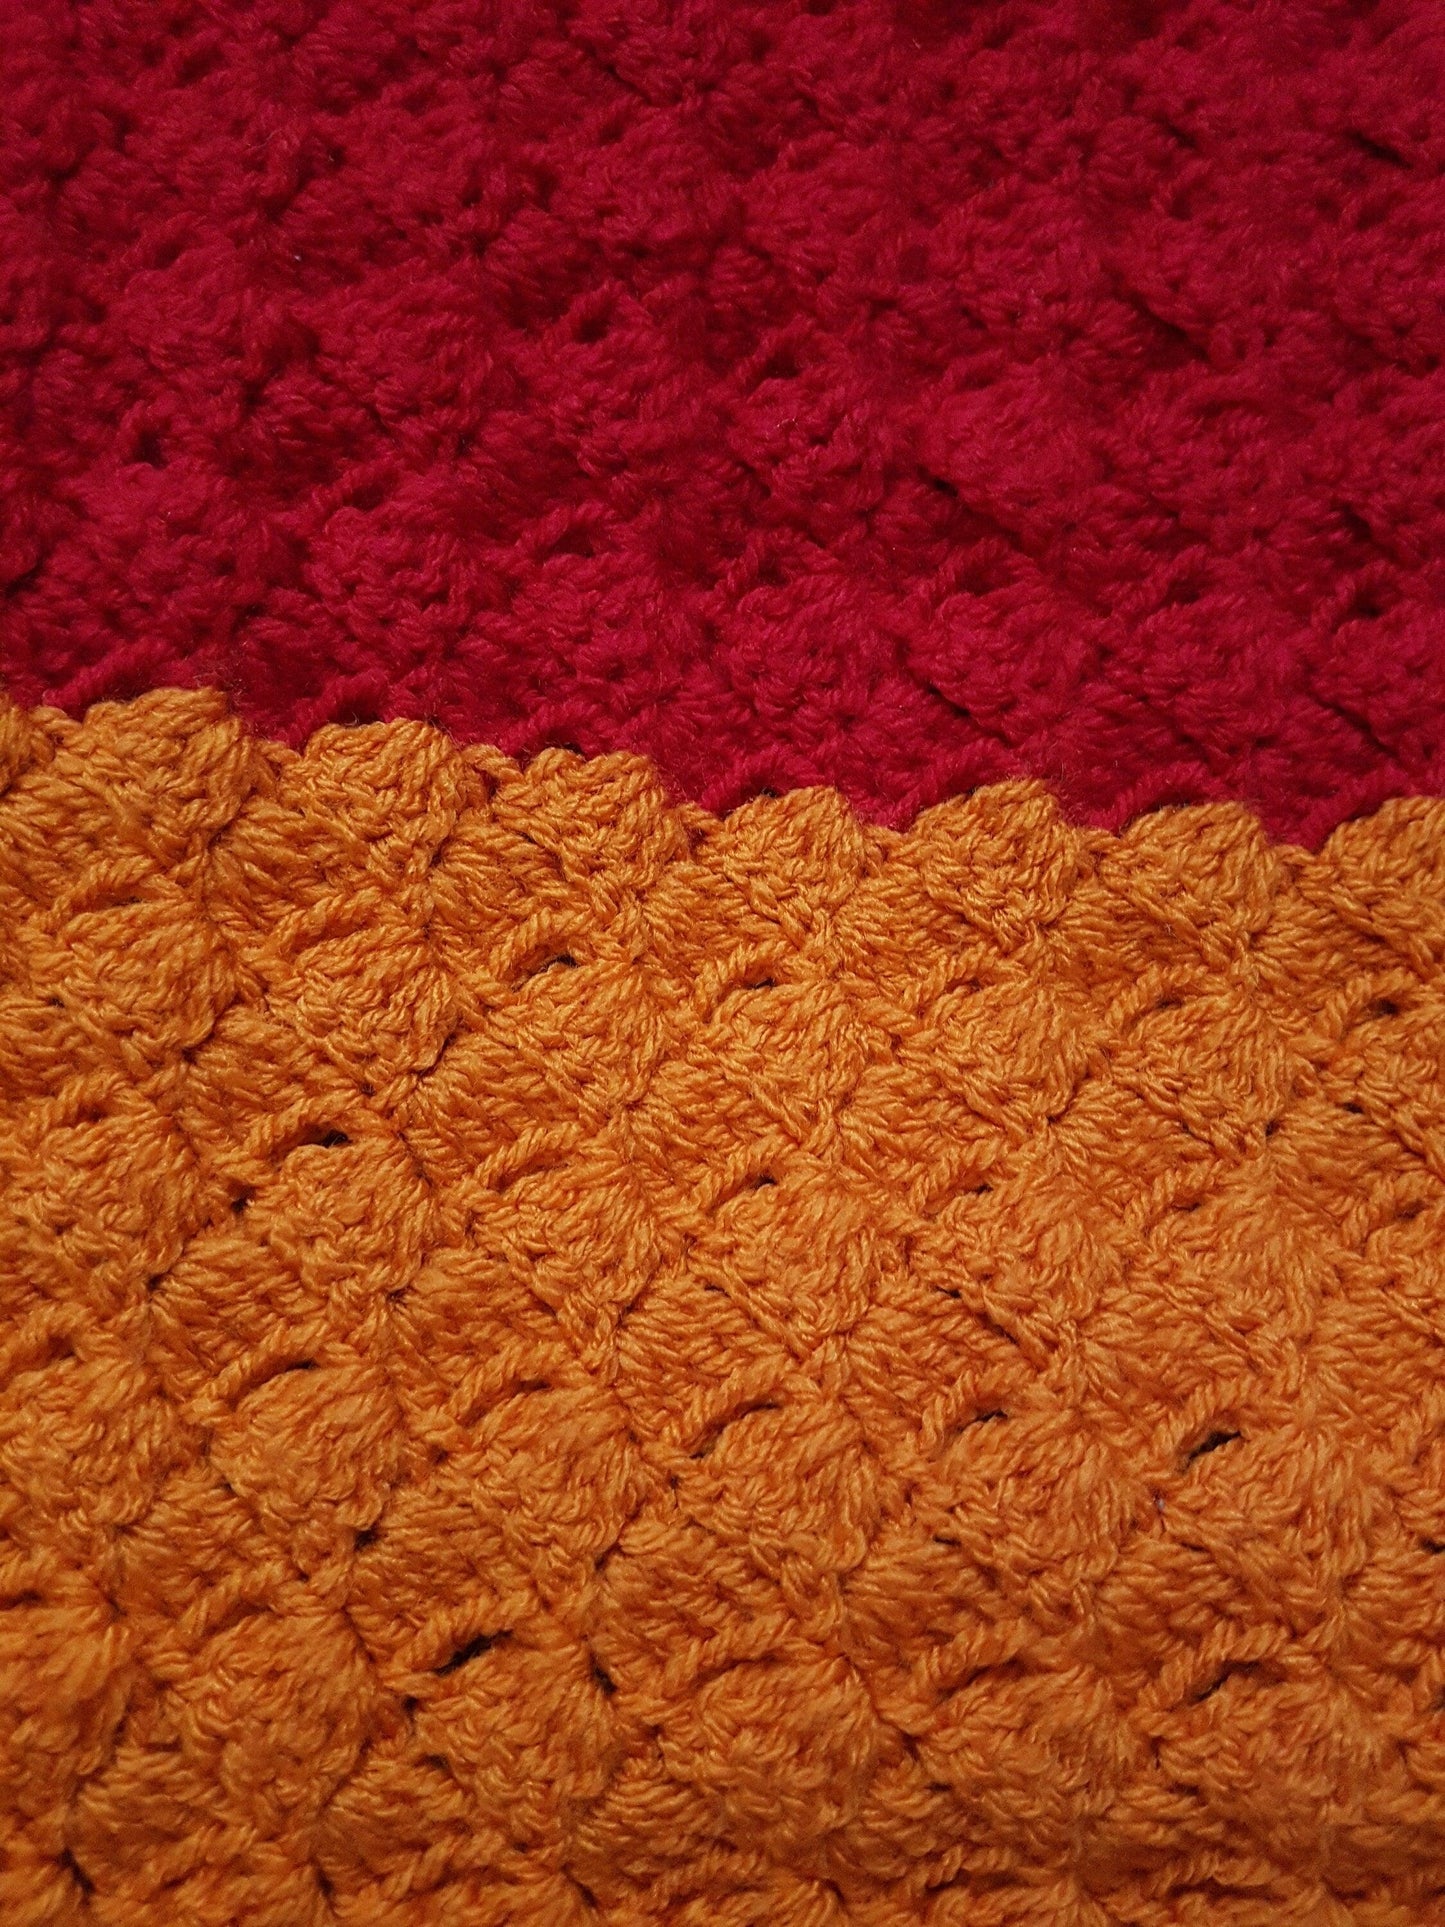 Handmade rainbow crochet blanket, striped with white edging. Chakra colours. Shown close up to illustrate stitch detail